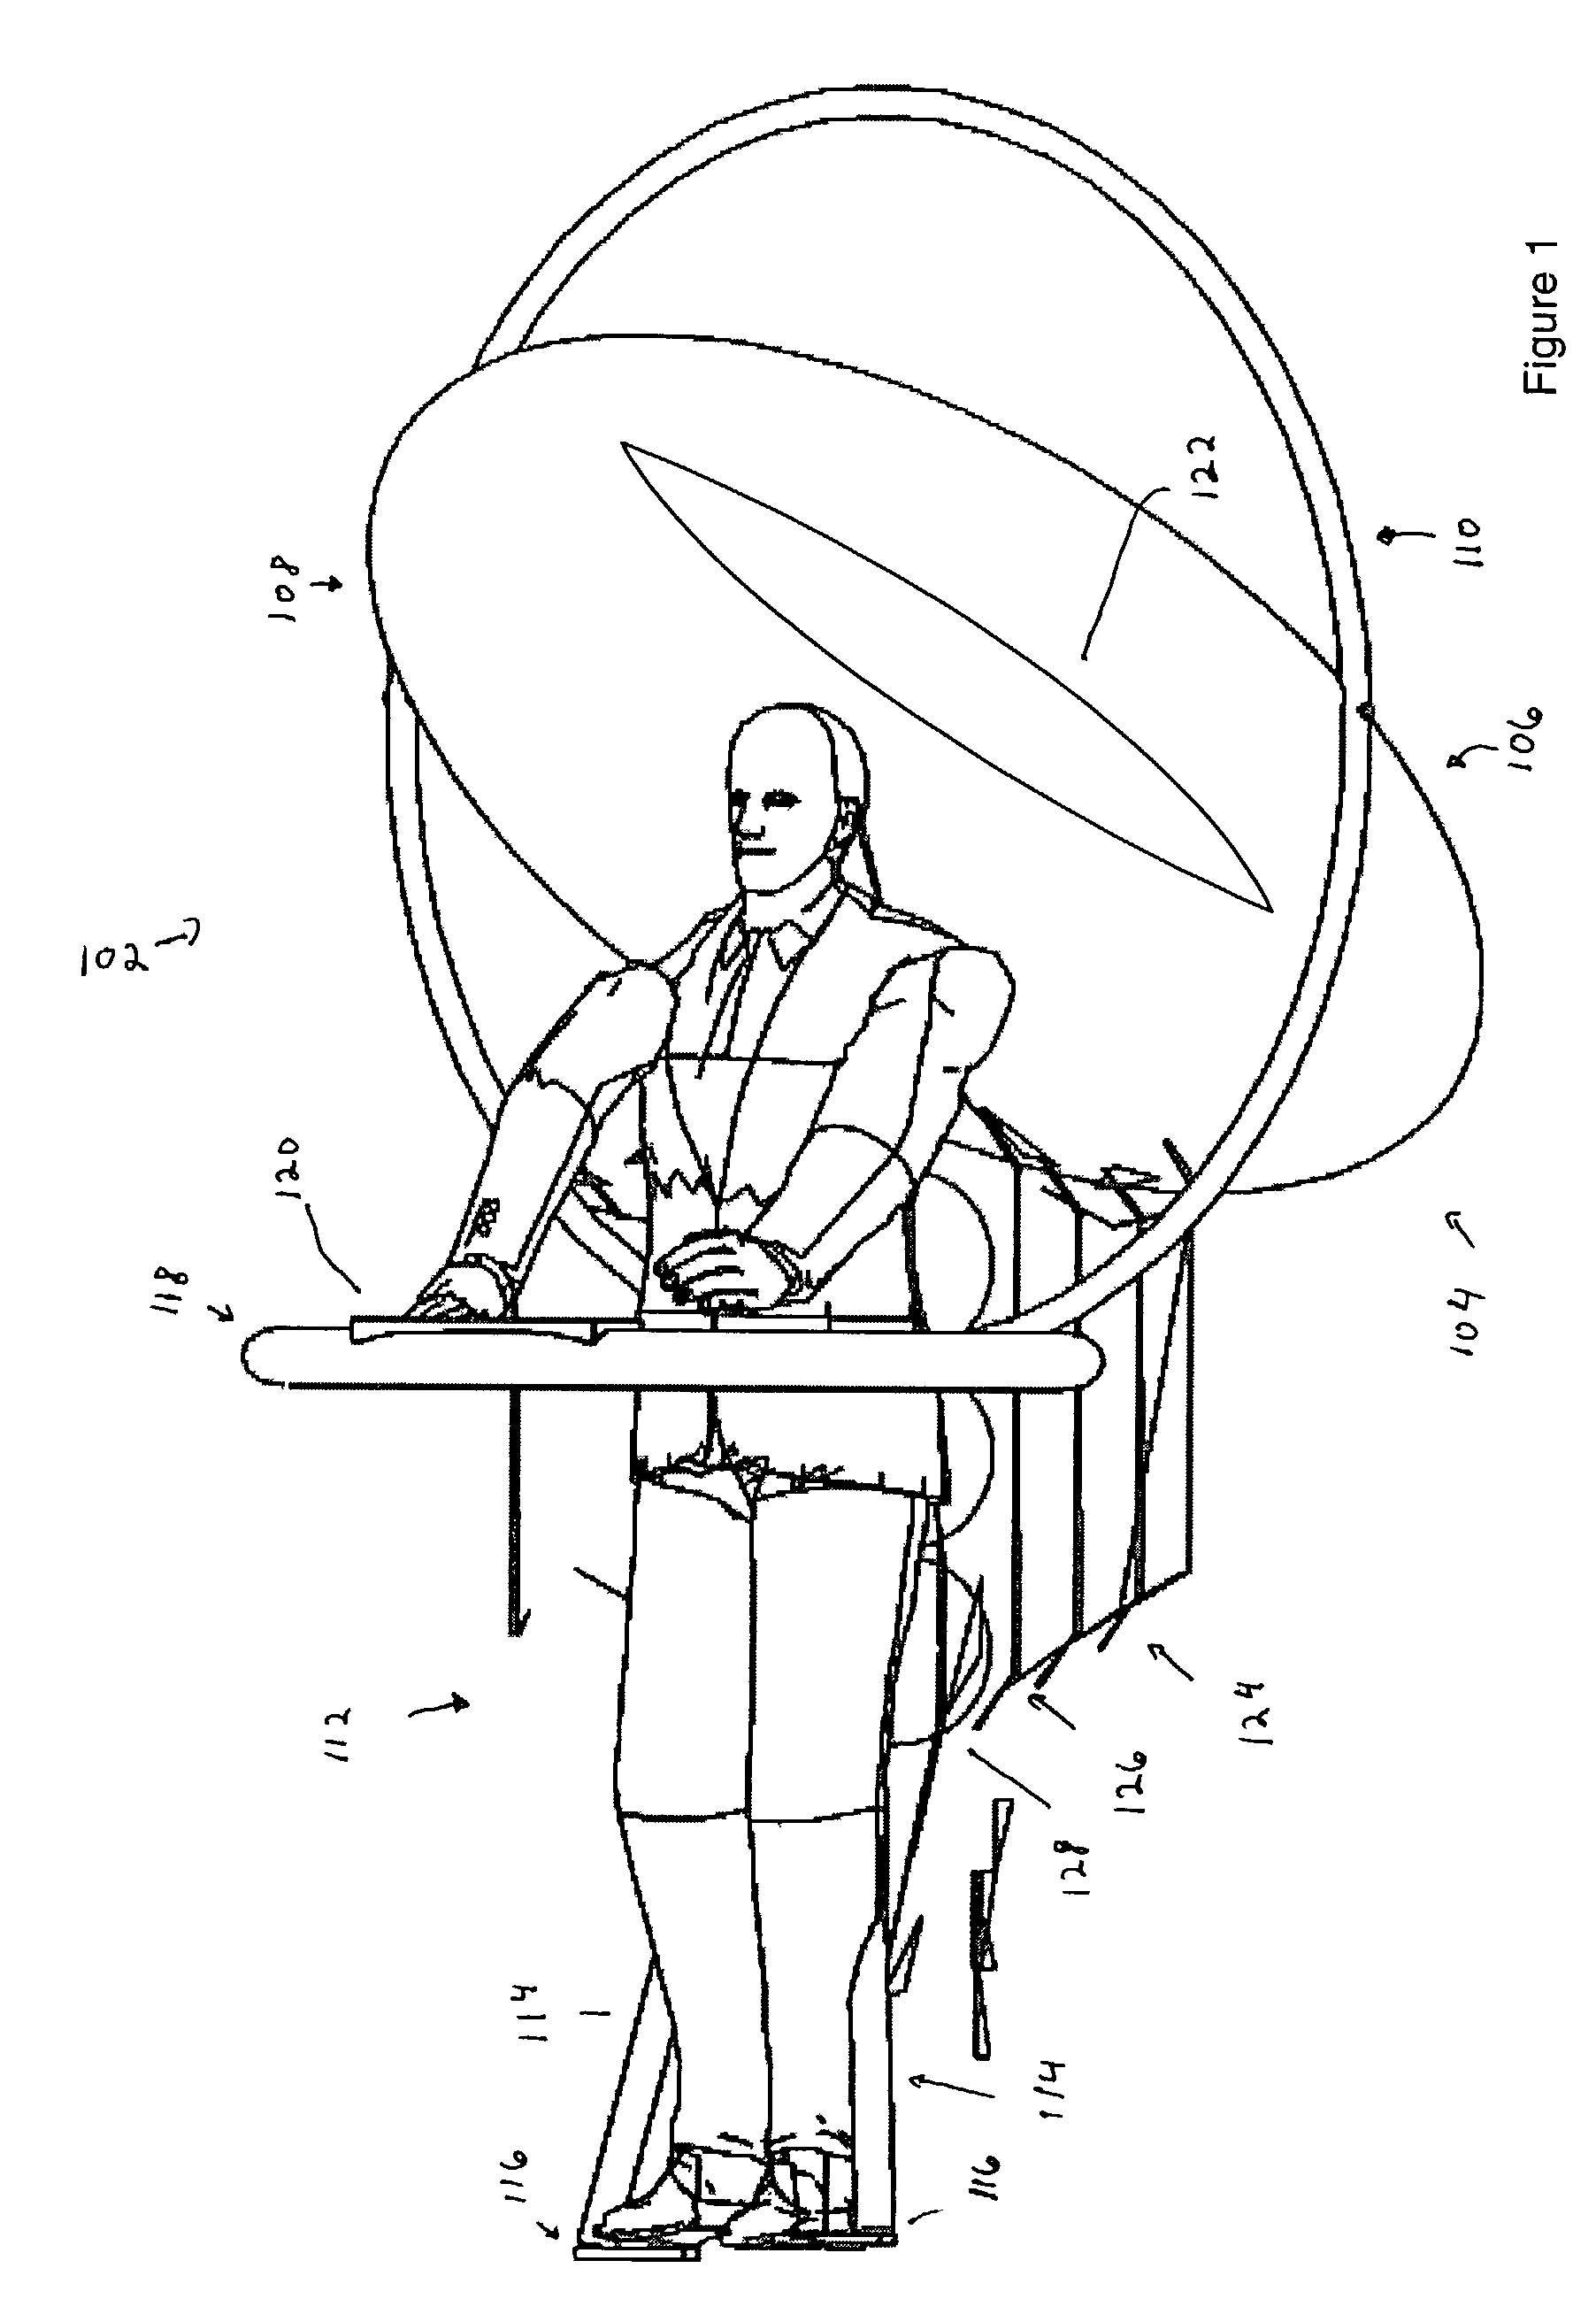 Personal flight vehicle and system